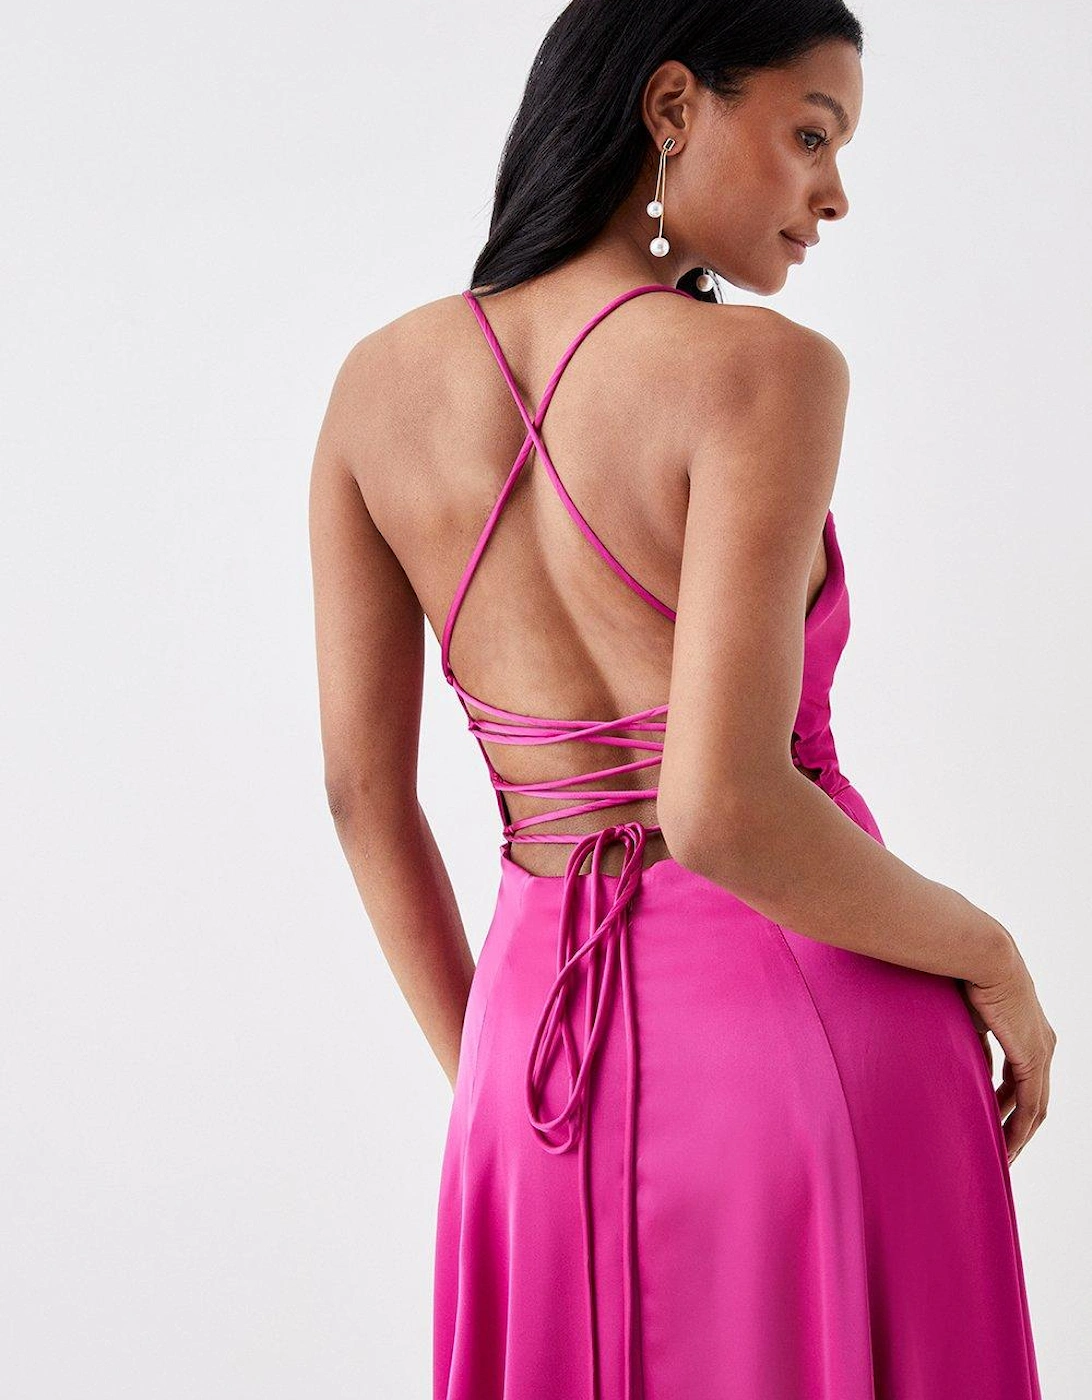 Petite Cowl Neck Satin Maxi Prom Dress With Strappy Back